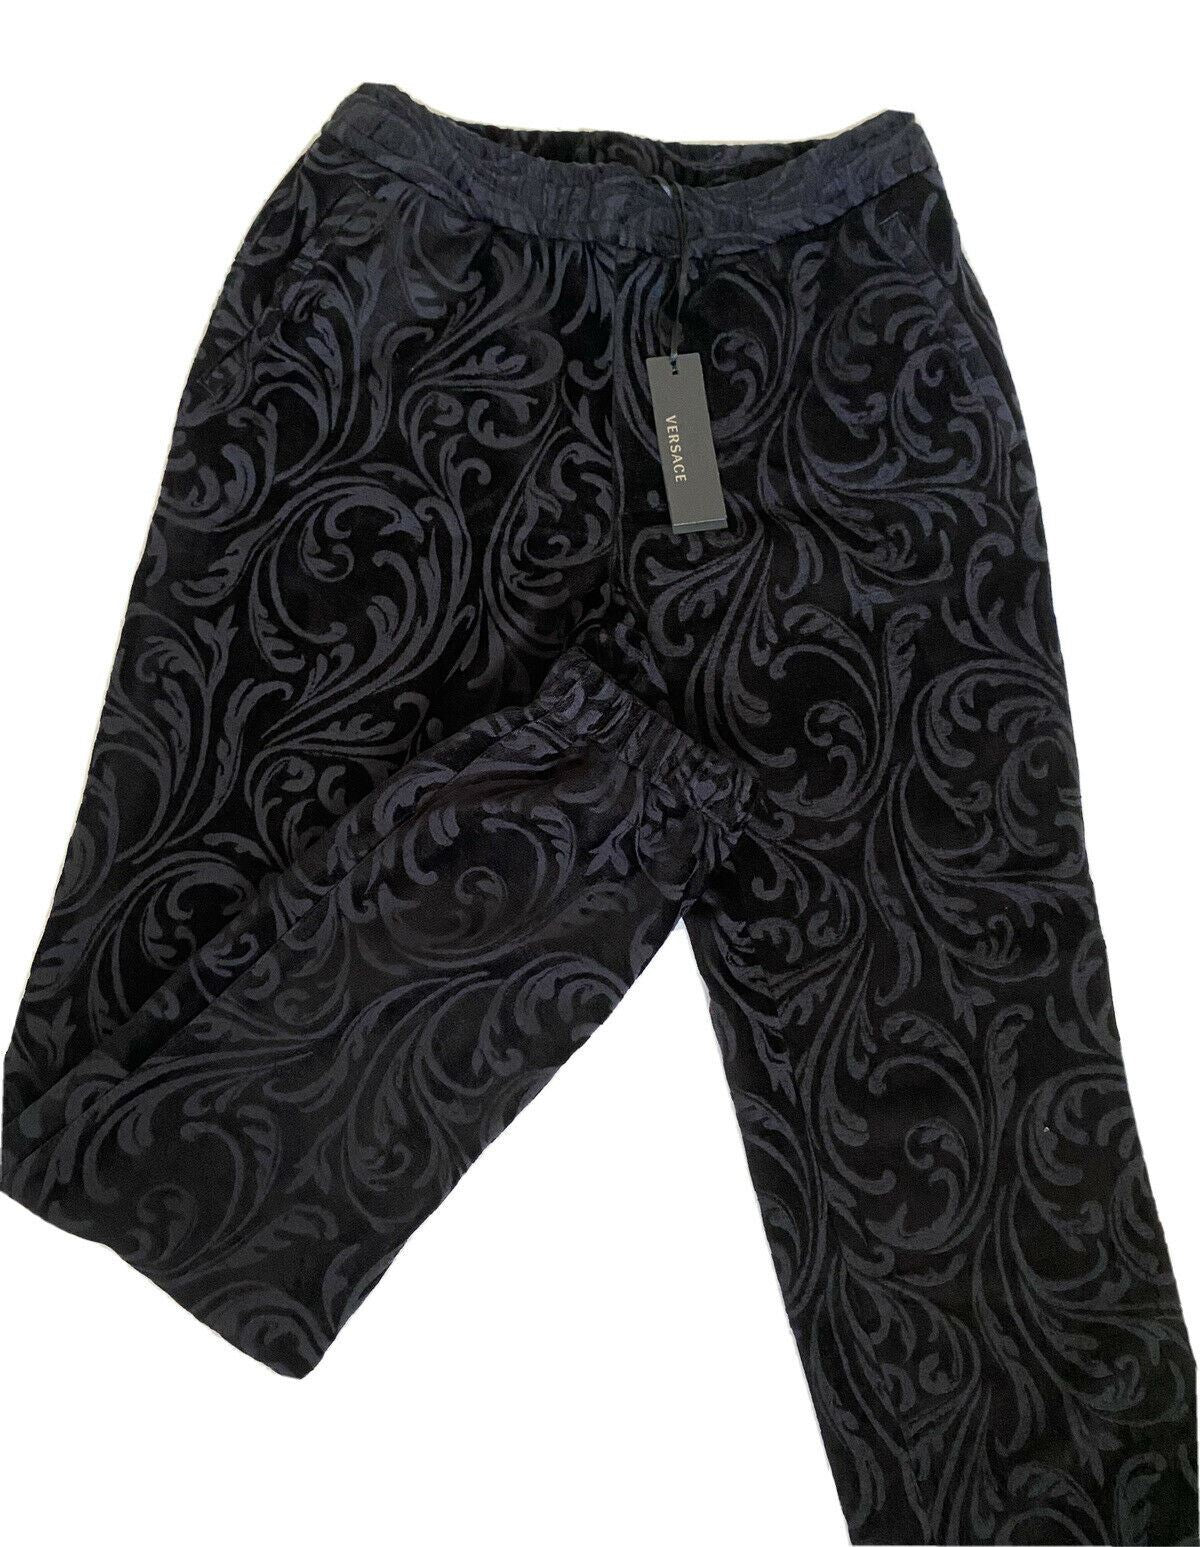 NWT $975 Versace Men's Black Activewear Pants Size Medium Made in Italy A79524